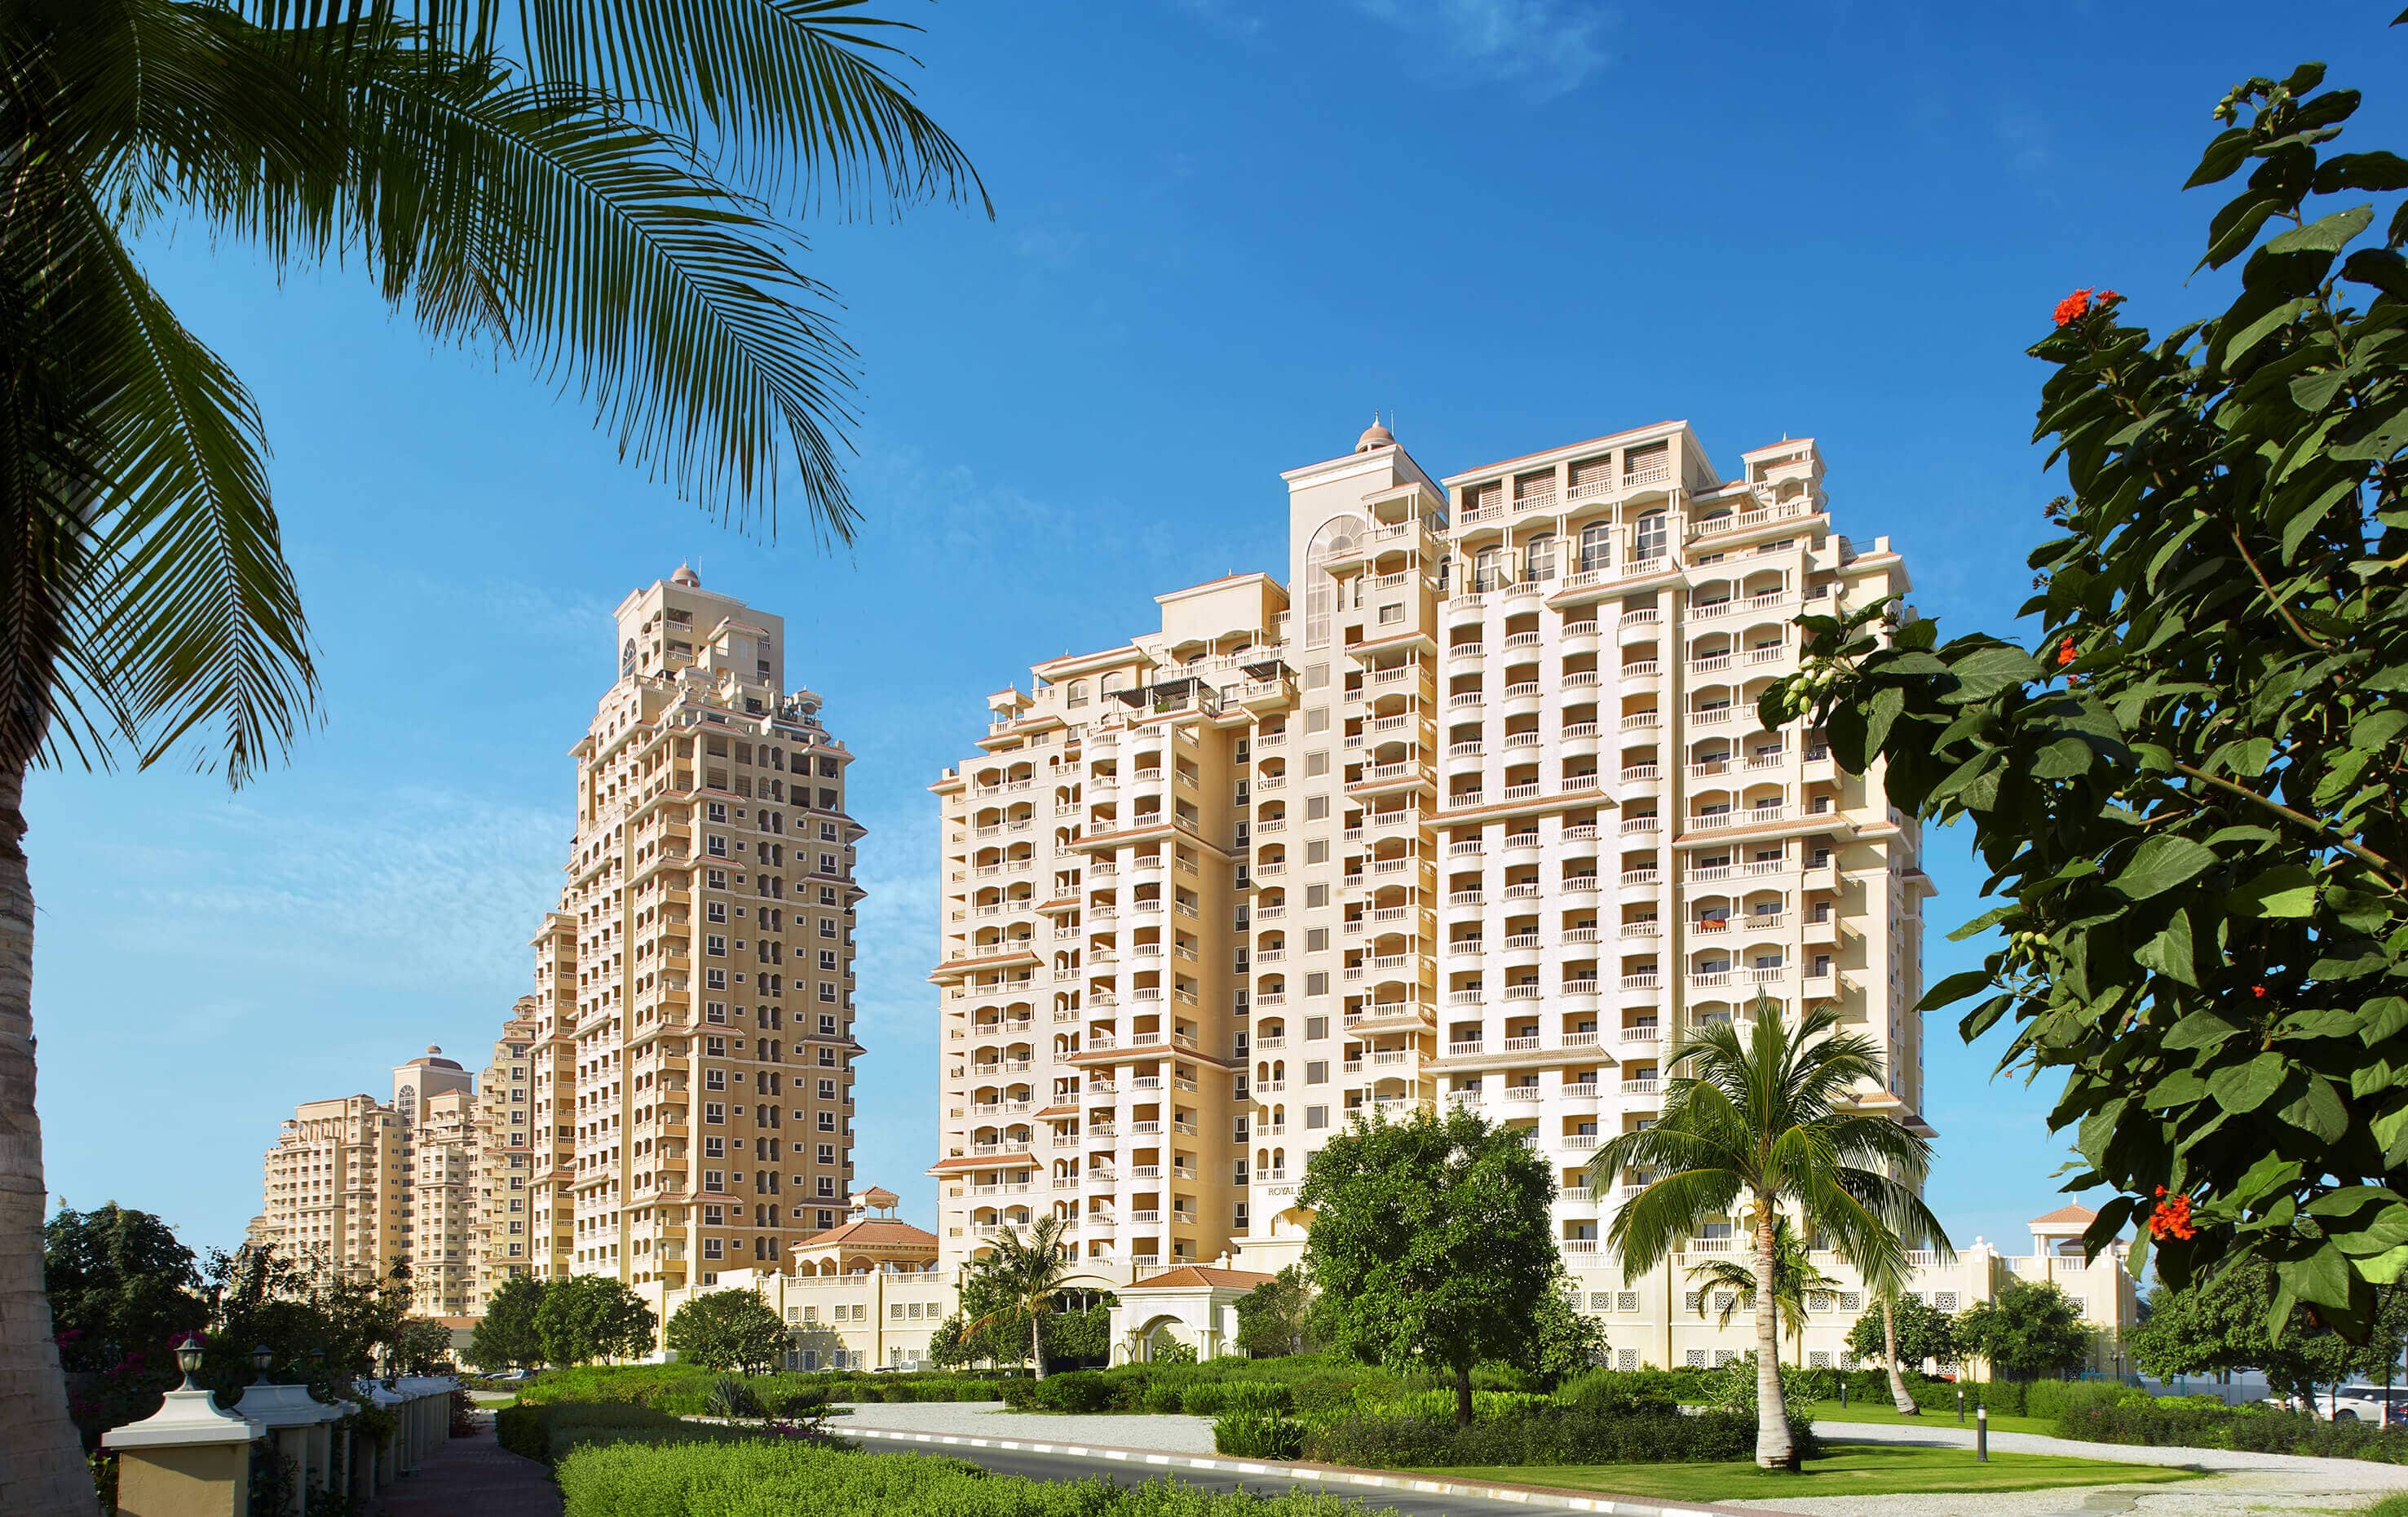 uploads/sale_property/4-br-apartments-for-sale-in-royal-breeze-residence/02facbfdec32235b99b6a8cc1b56777d.webp